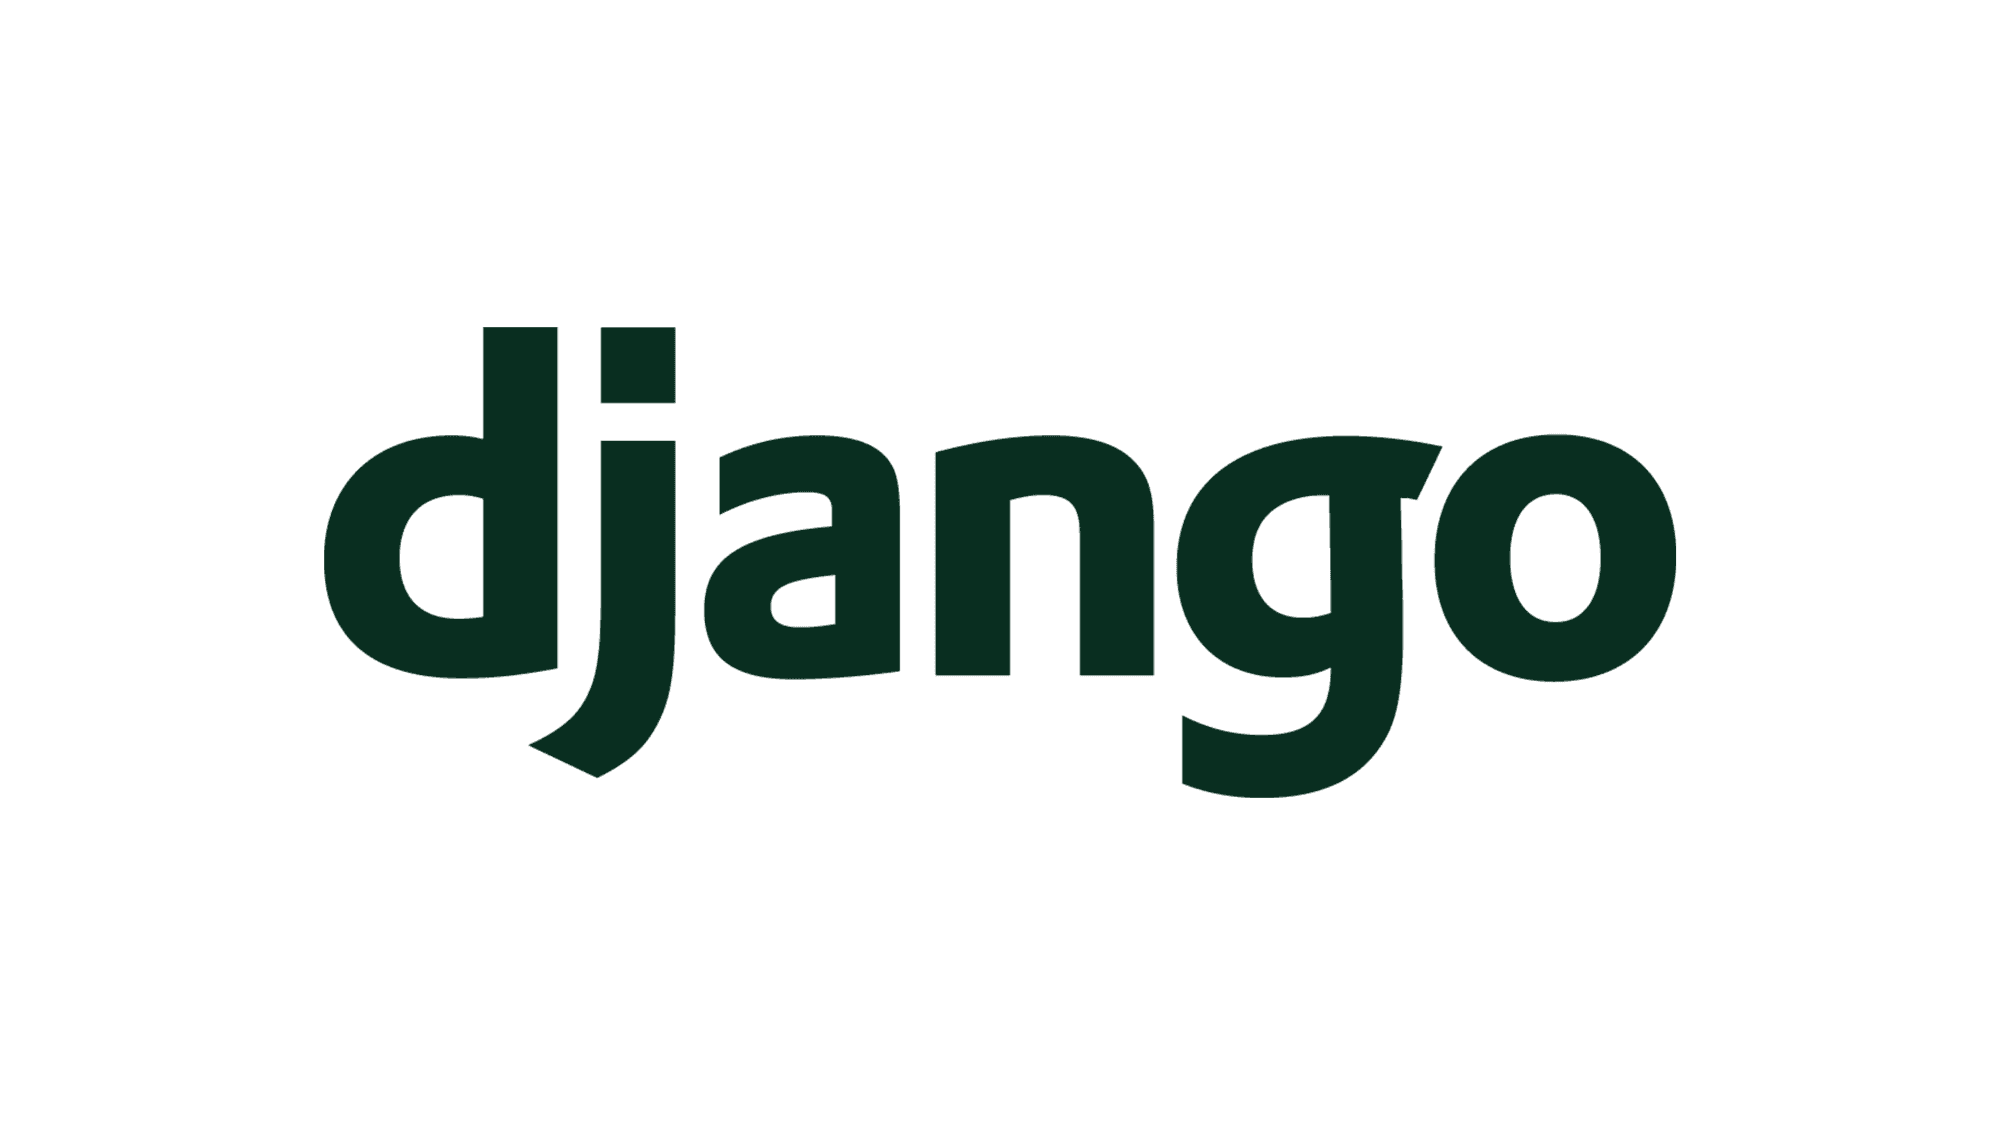 Learning Django: Tired of YouTube Tutorials and Not Ready for Documentation? Give These Books a Try